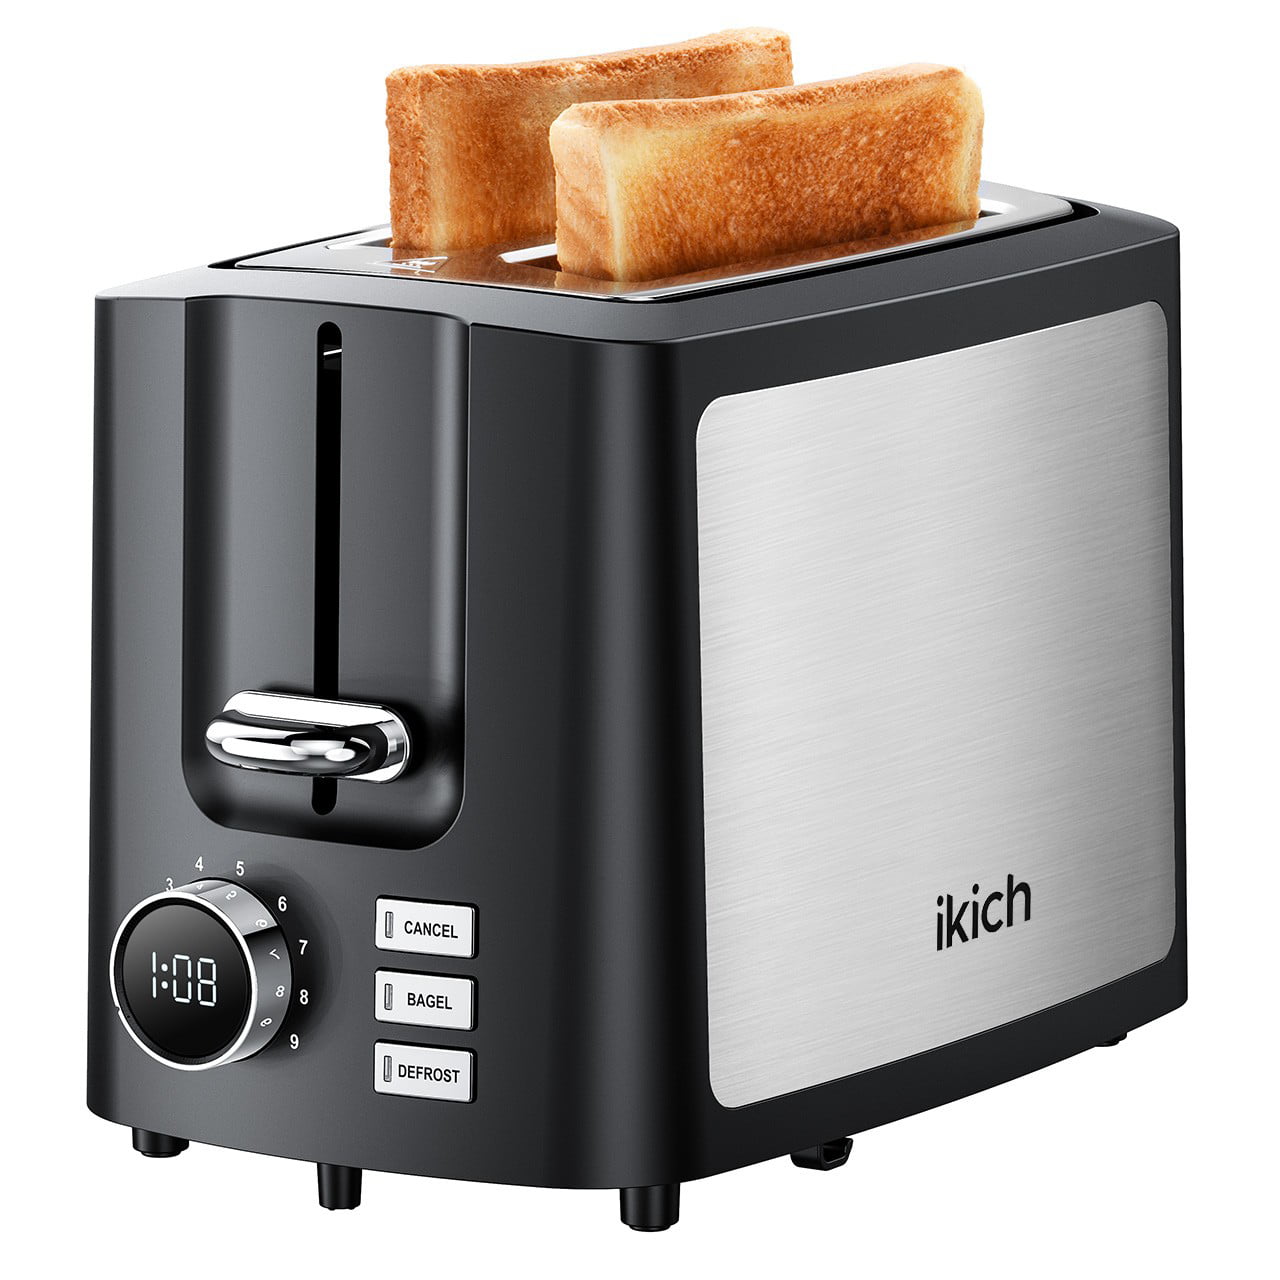 2 Slice Stainless Steel Wide Slot Toaster Reheat Defrost High Lift 900W Cream 